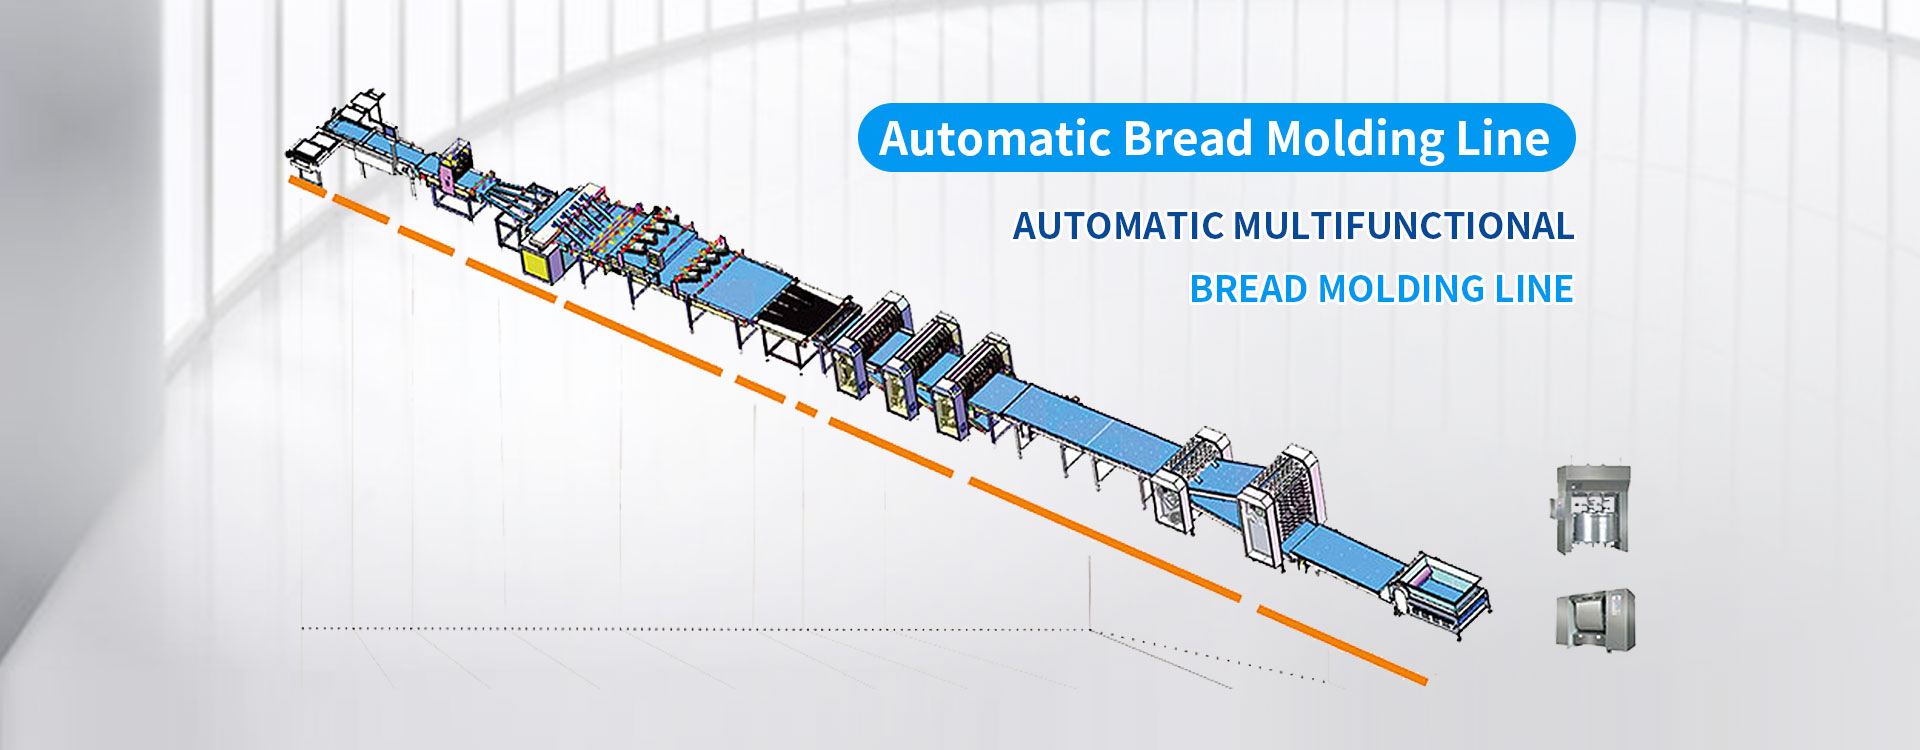 Automatic Multifunctional Bread Molding Line